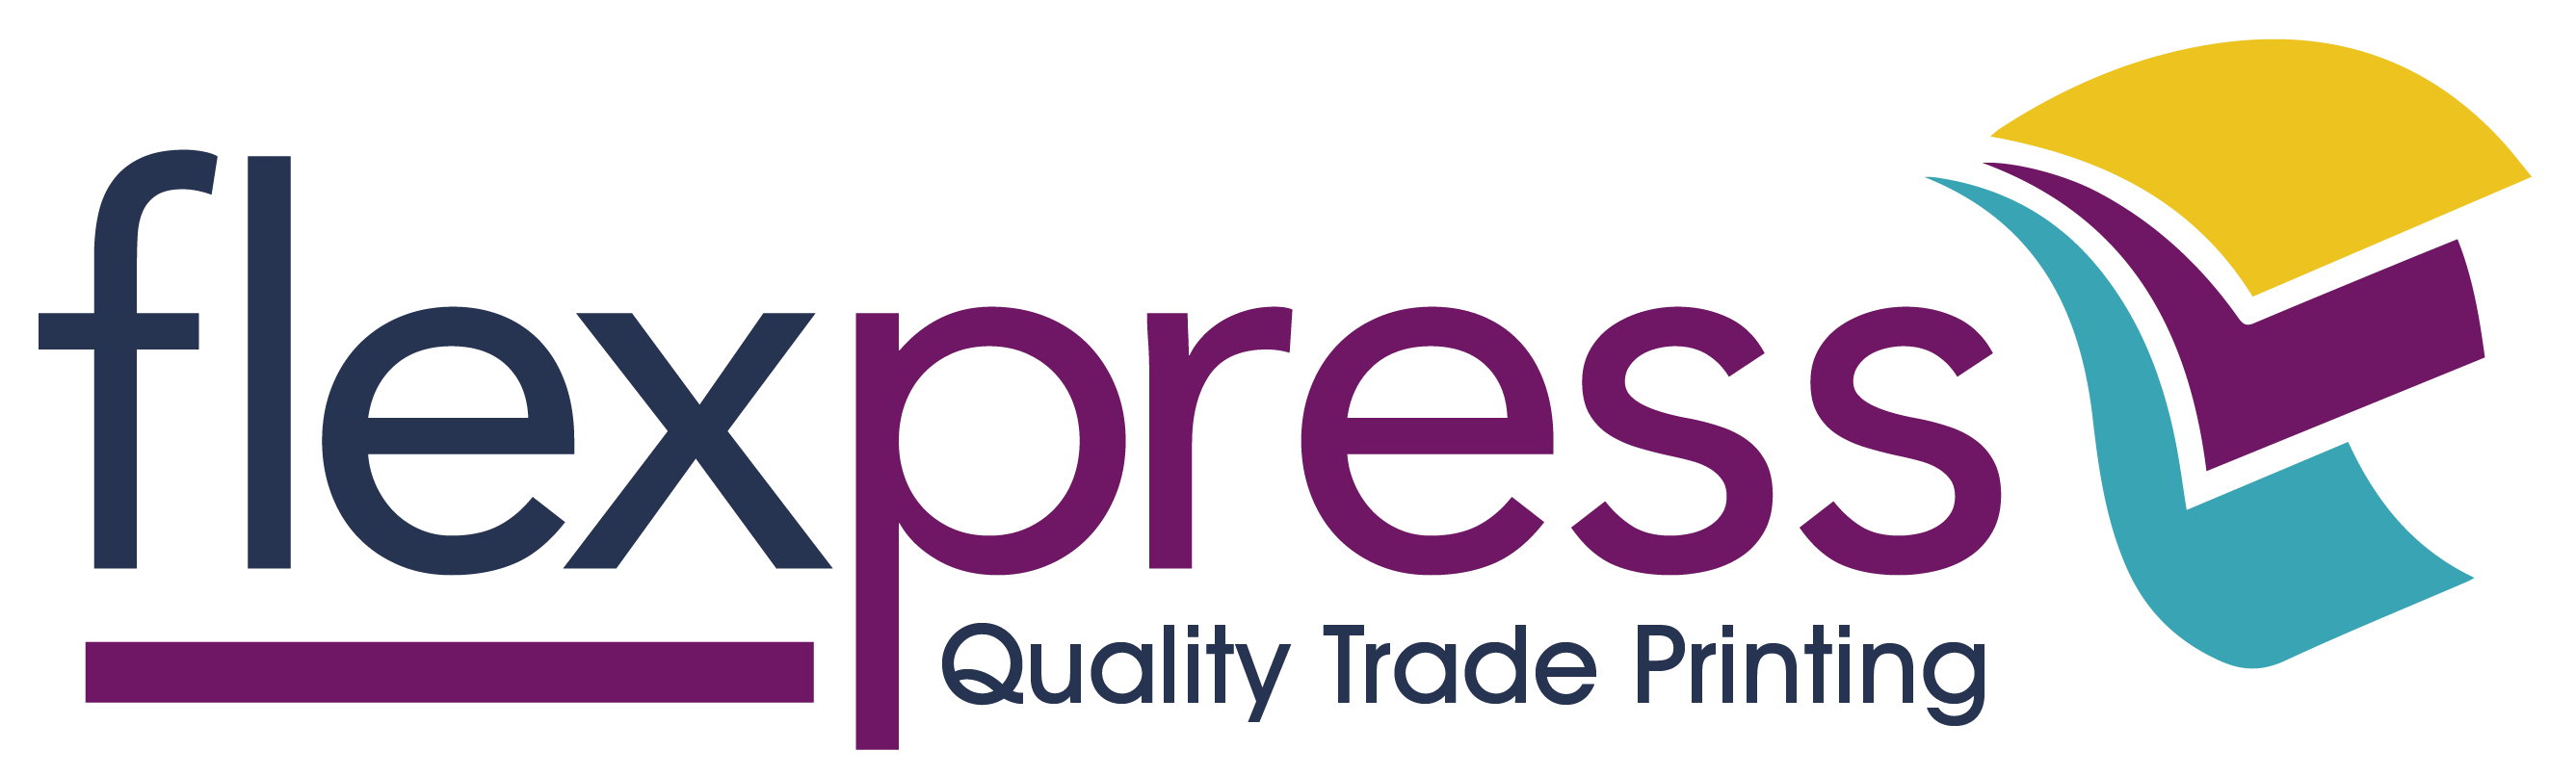 Online Printing Logo - Die-Cut Labels On A4 Sheets online printing | Flexpress Leicester